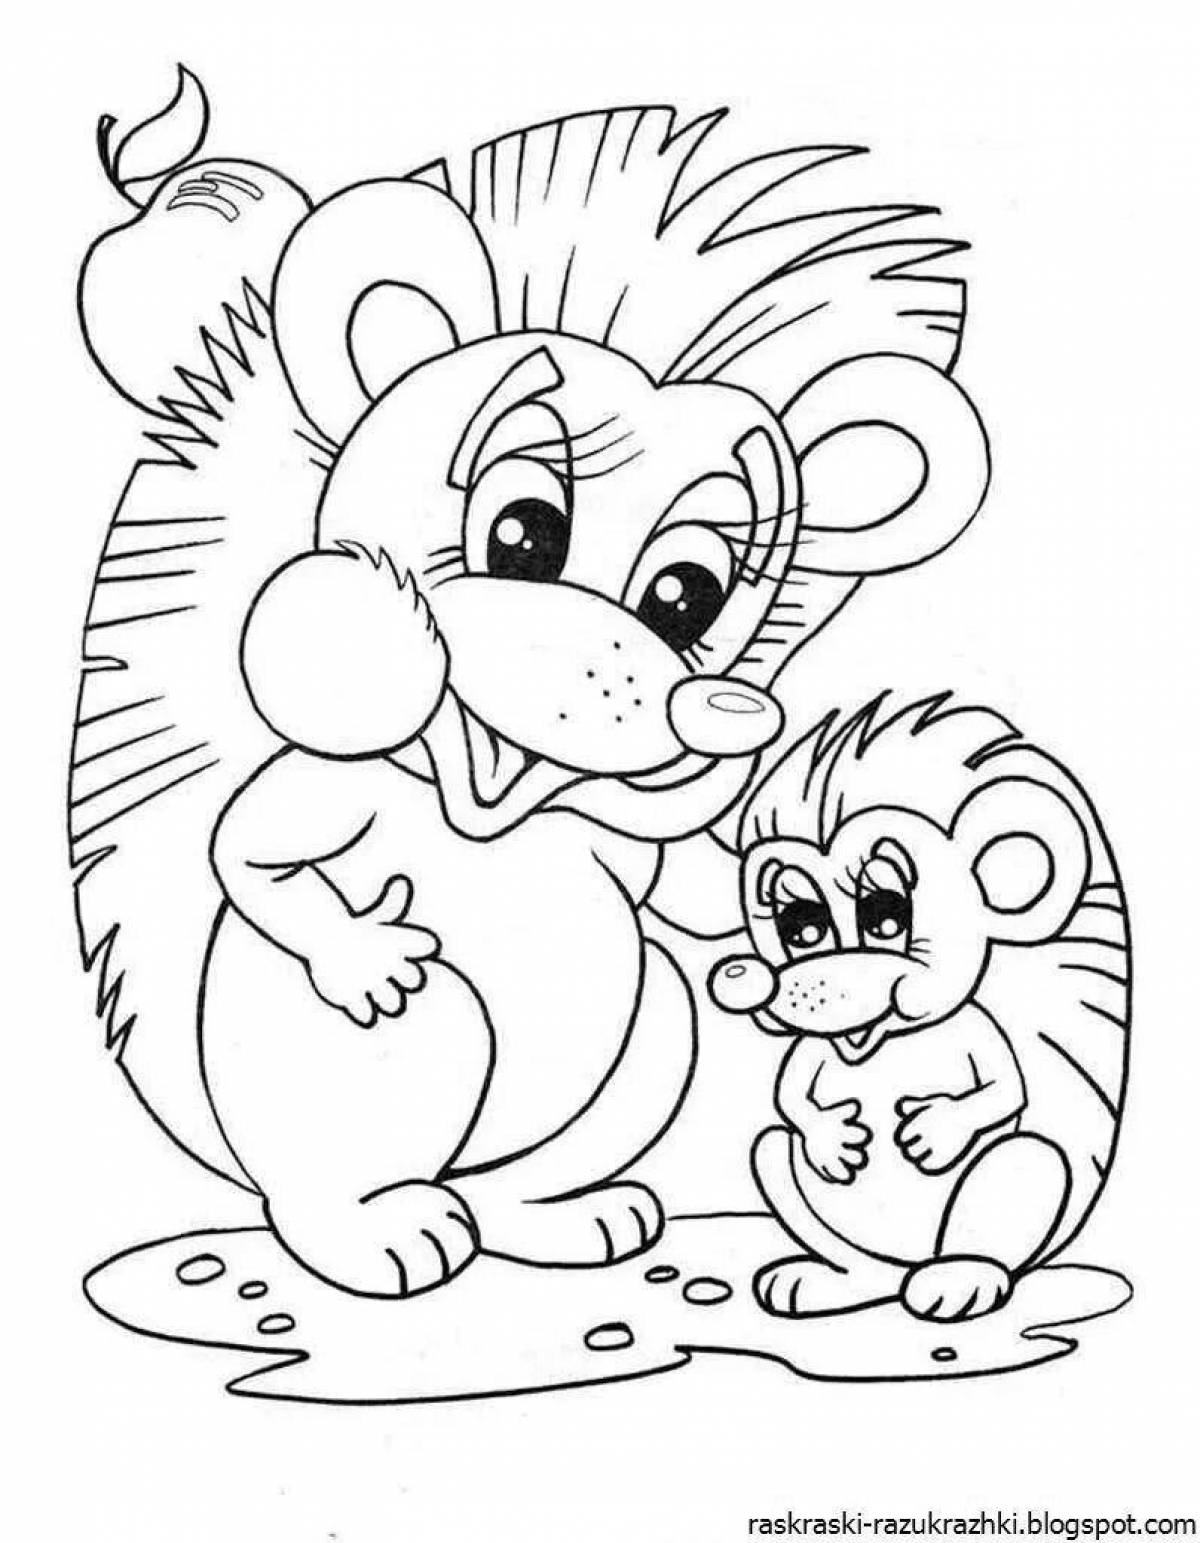 Amazing animal coloring pages for kids